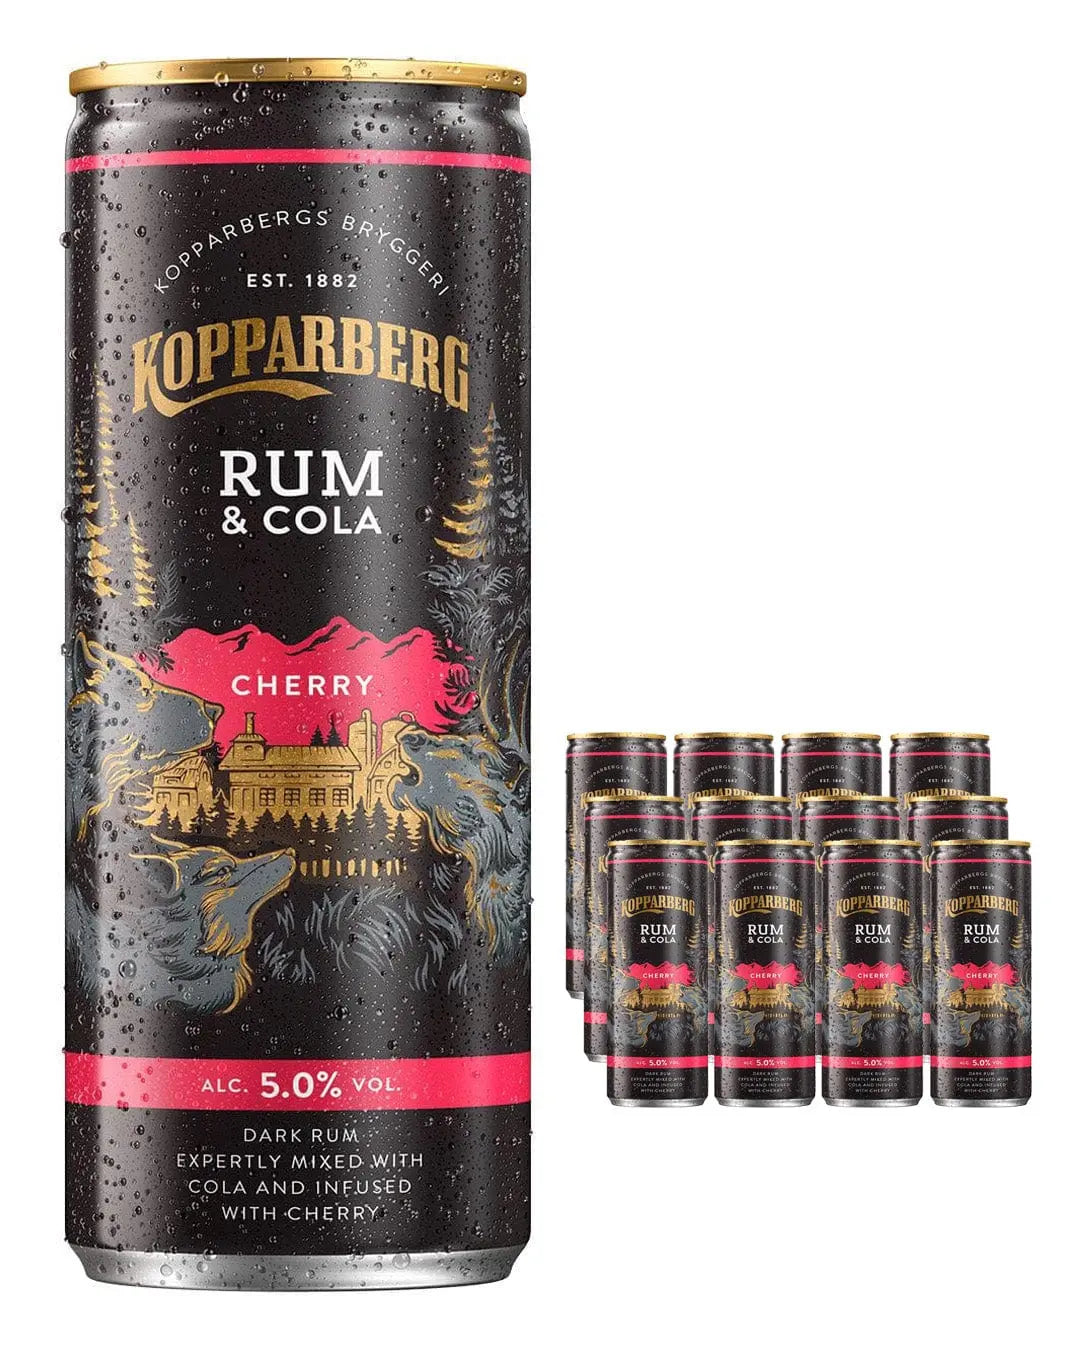 Kopparberg Cherry Spiced Rum & Cola Premixed Can Multipack, 12 x 250 ml Ready Made Cocktails